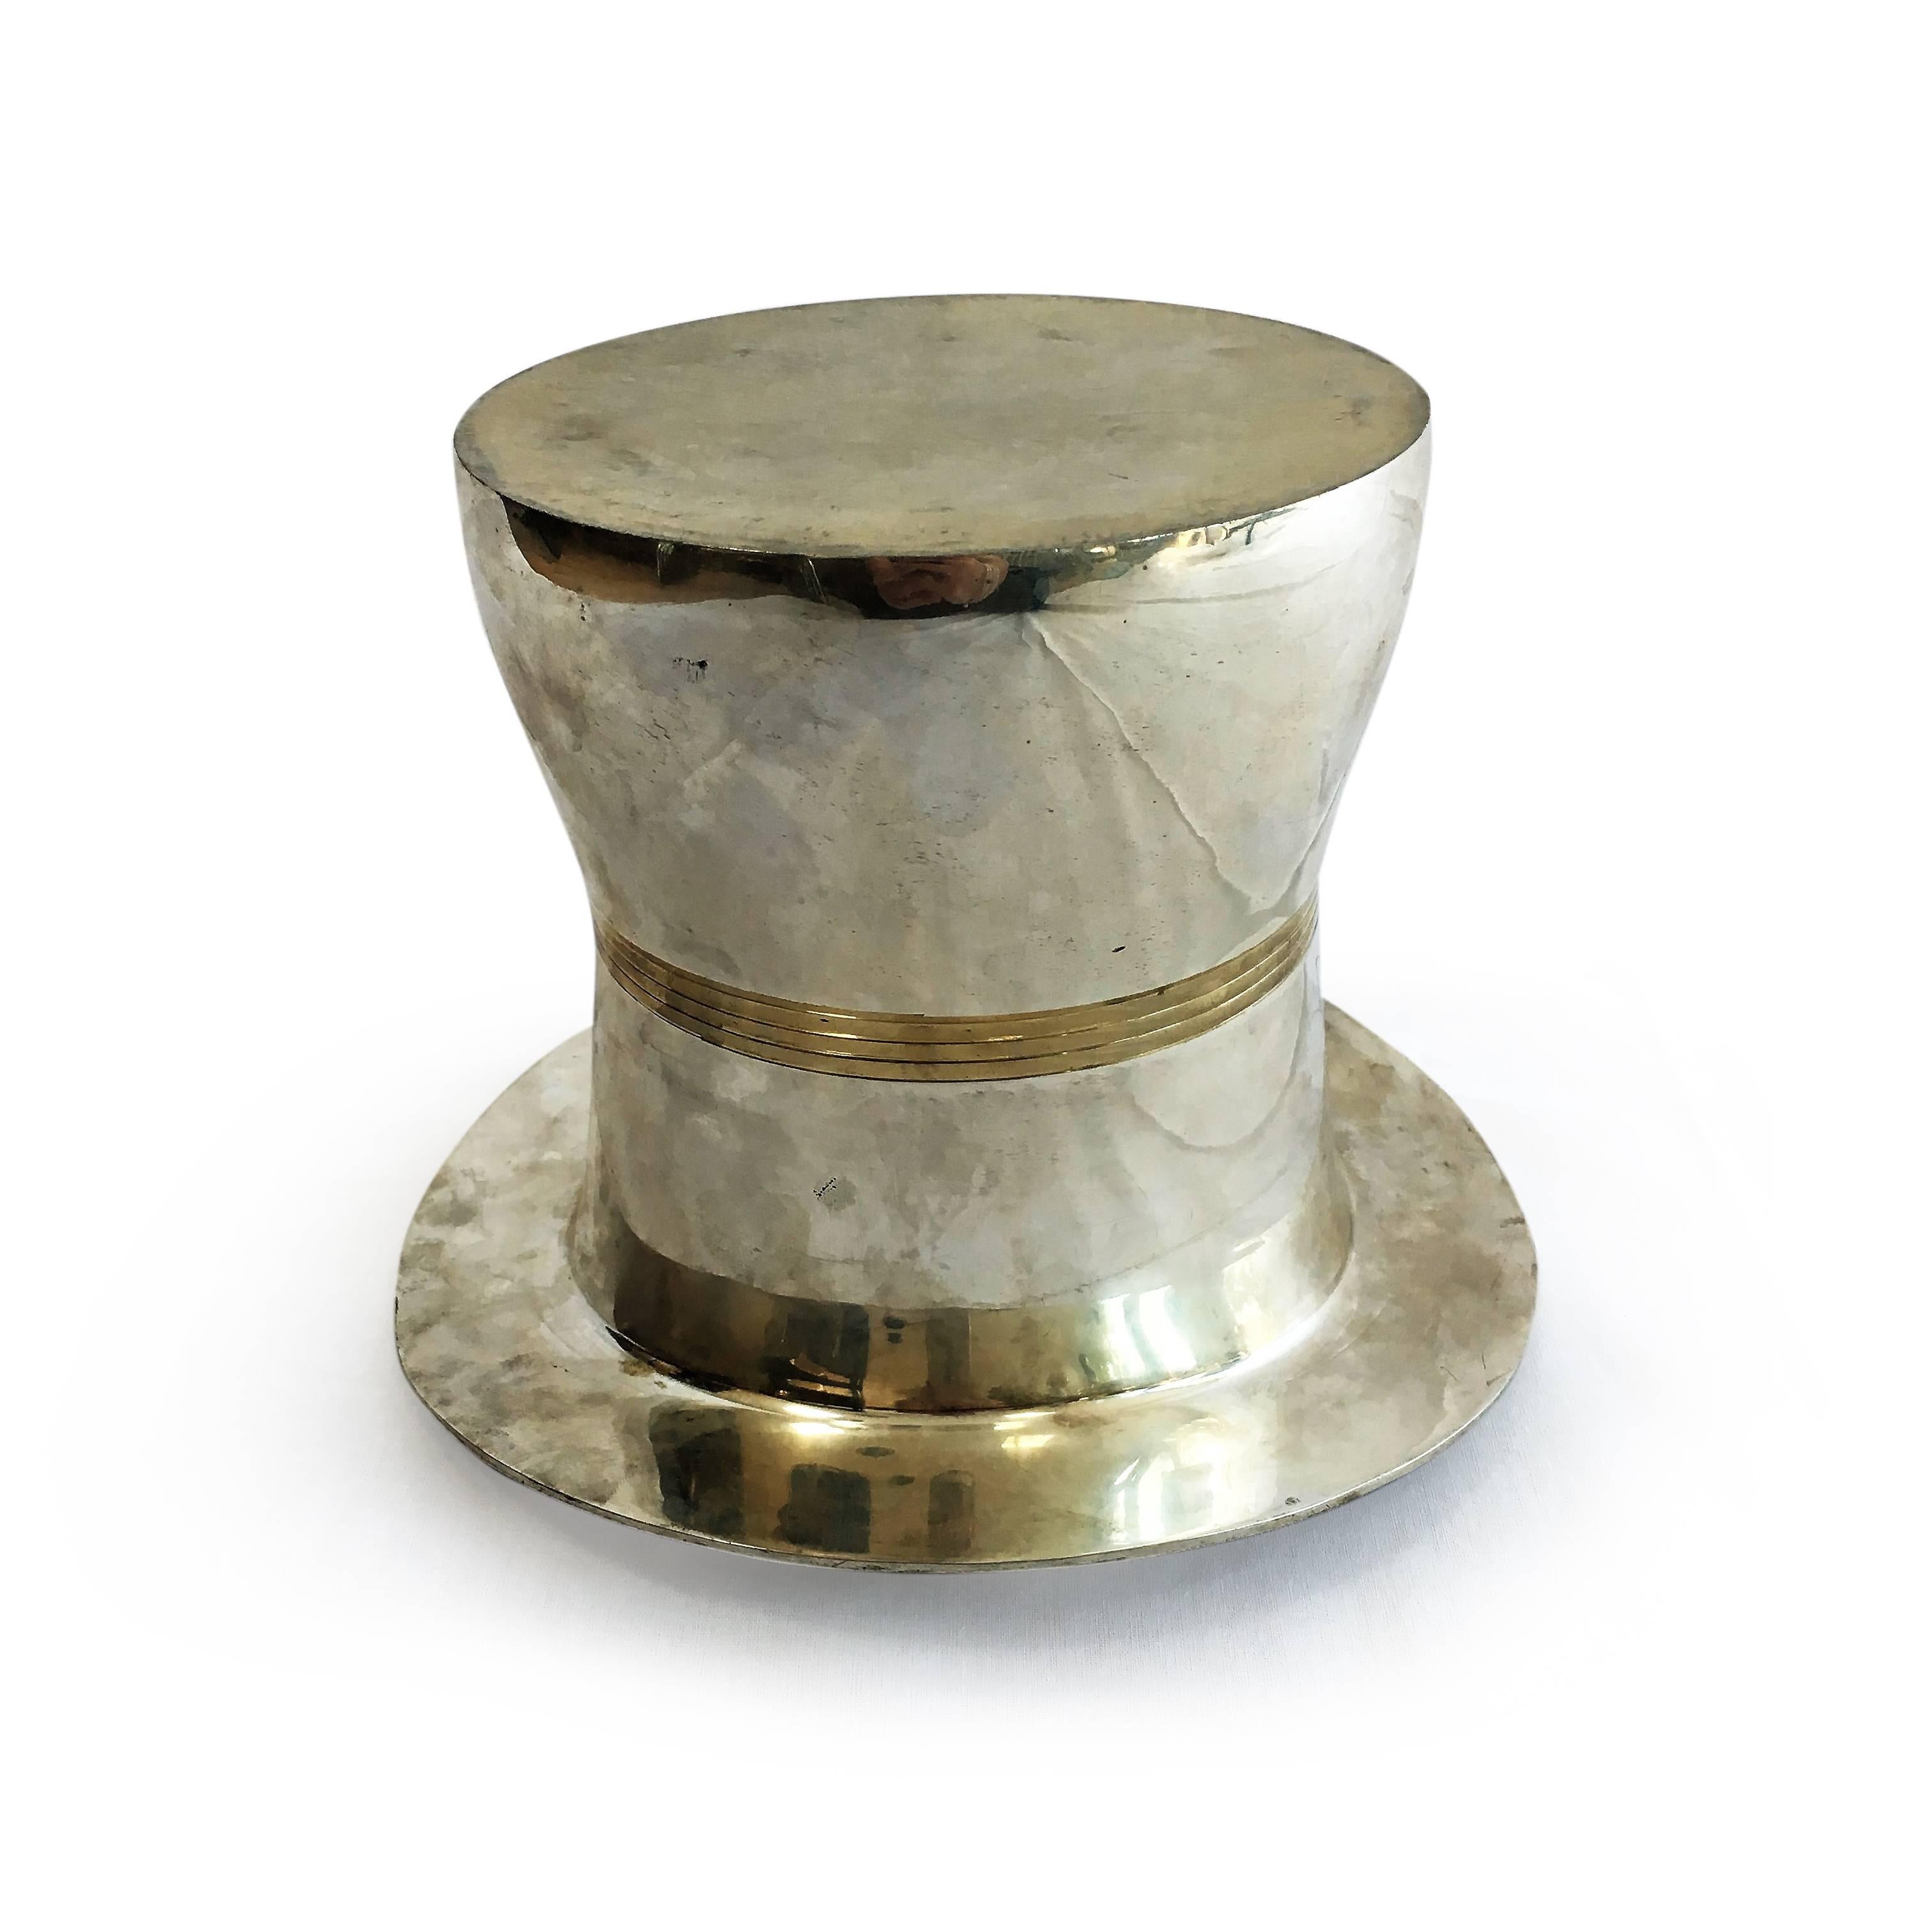 An eye catching 20th century silver plated top hat ice bucket, we believe is from America.

This piece is in the shape of an upside down top hat and is in good vintage condition with signs of wear consistent with age and use.

A fabulous talking